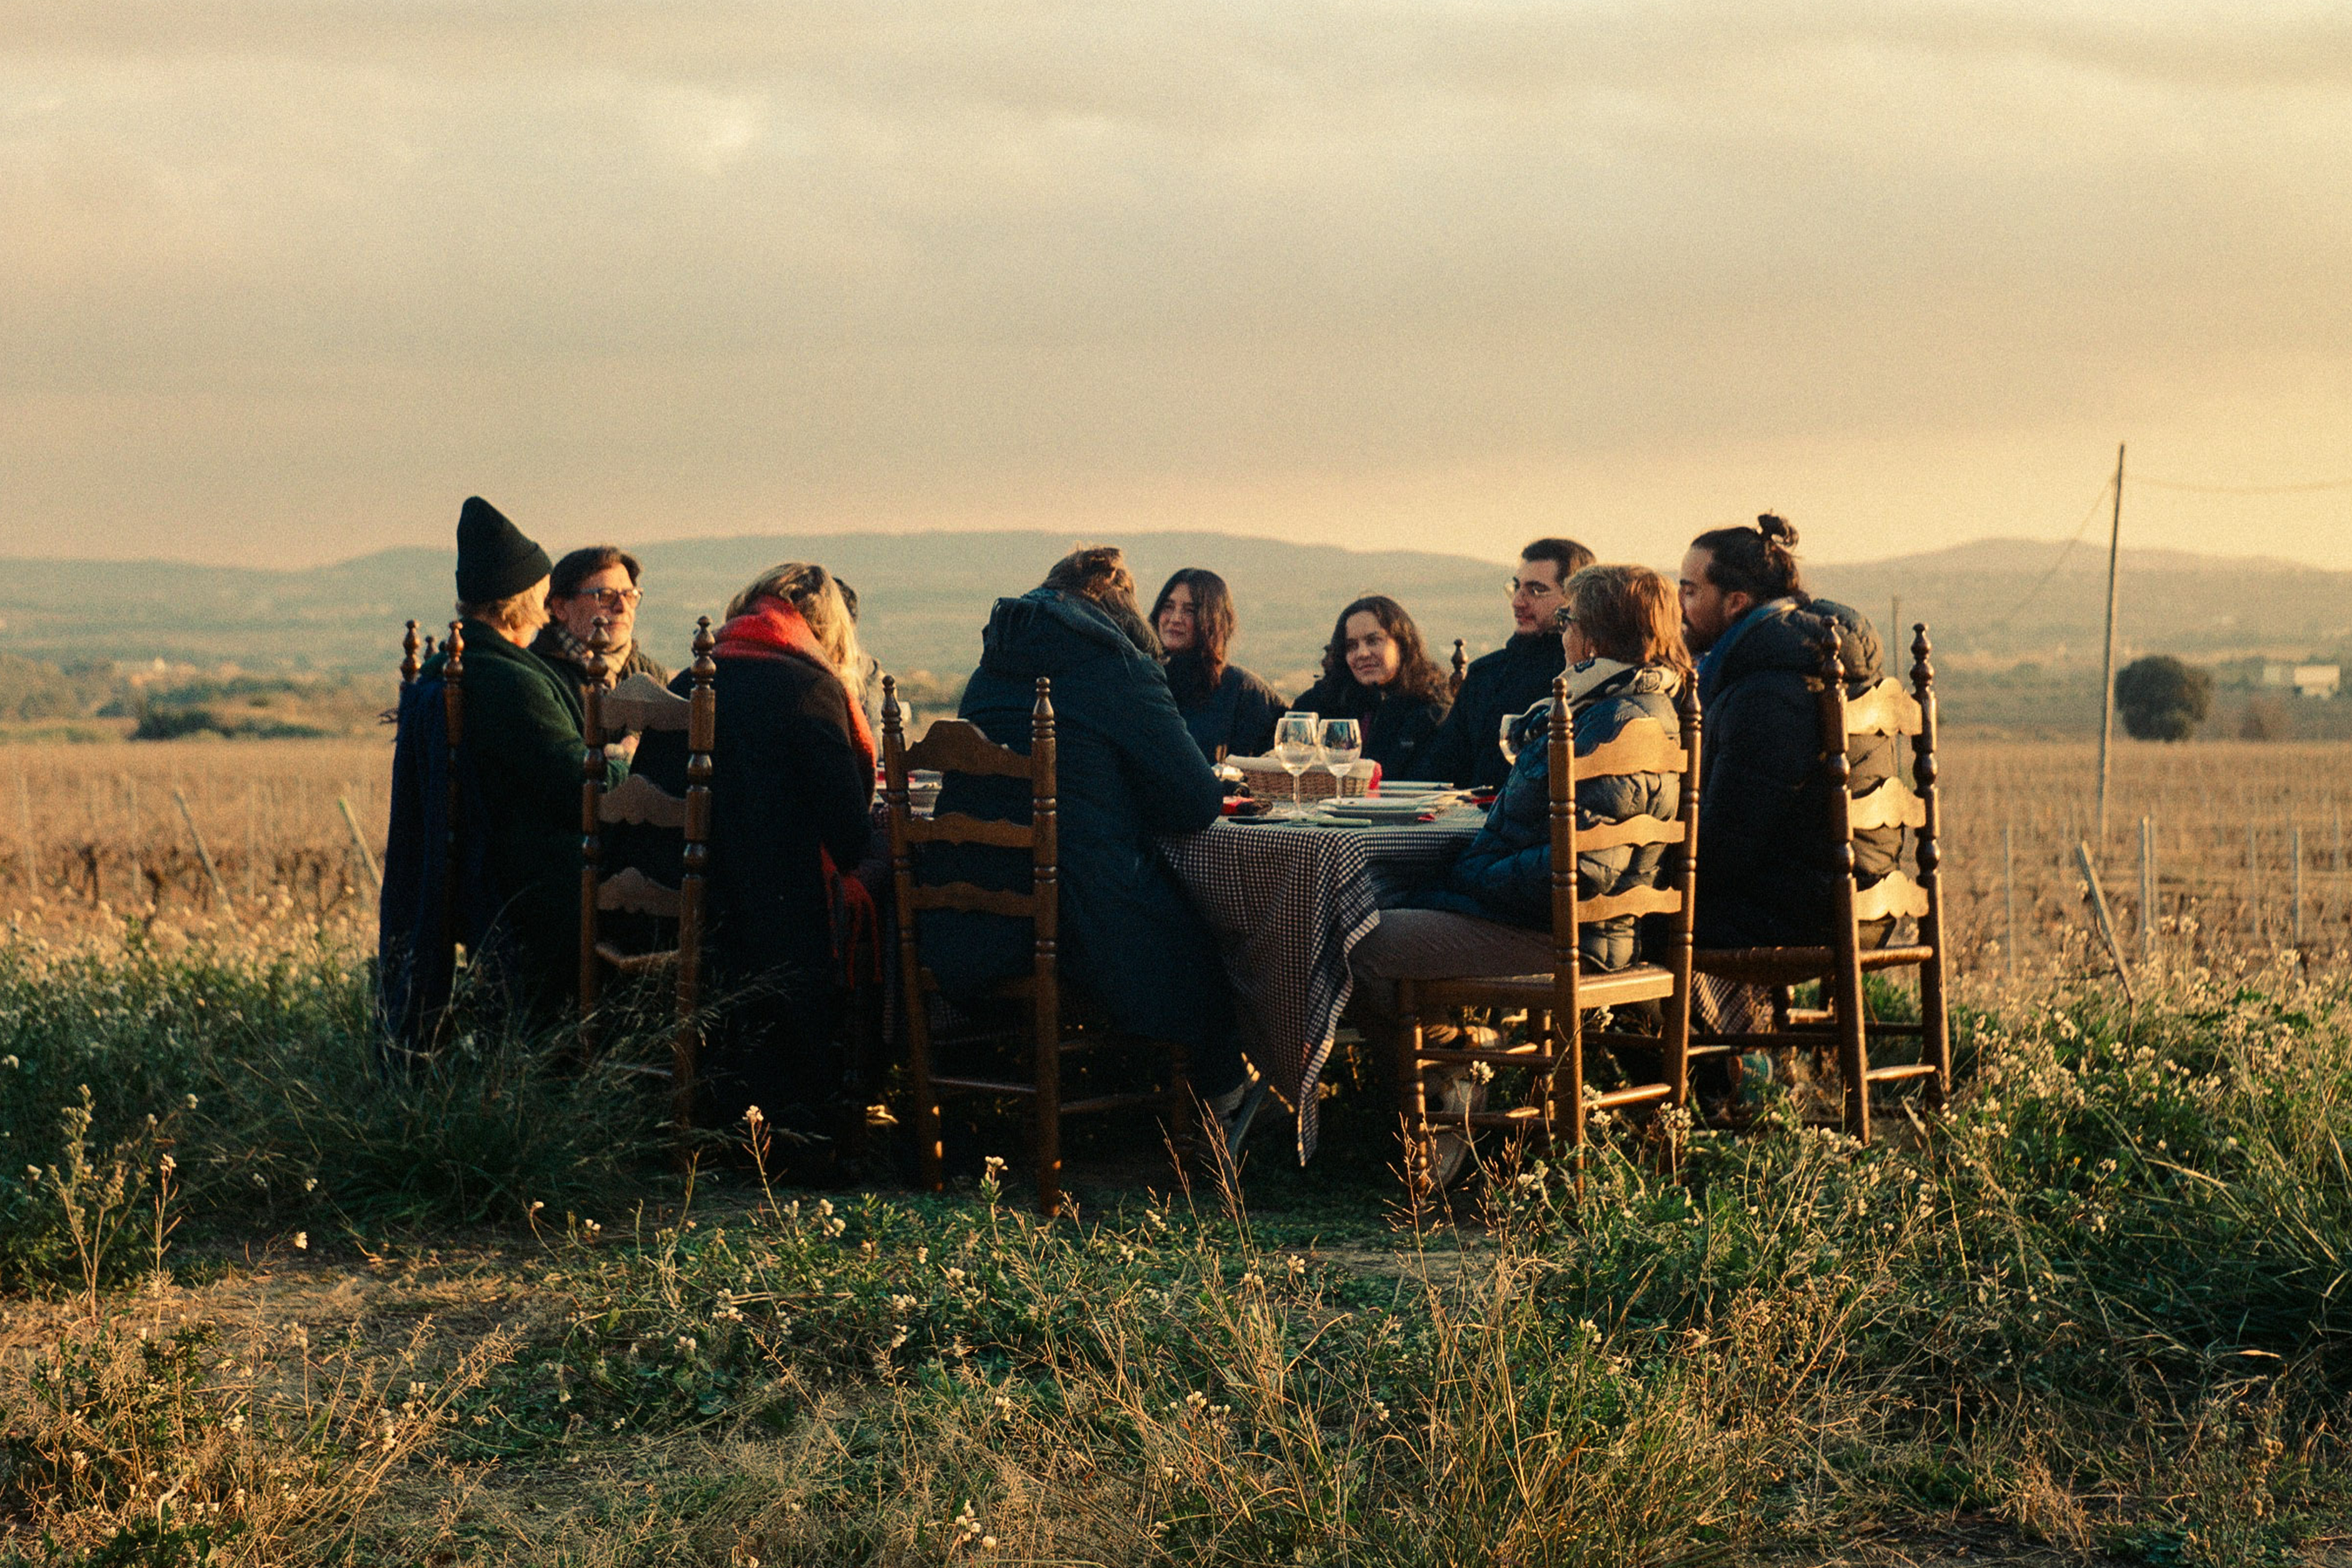 People gathered at the wood dining table for a meal